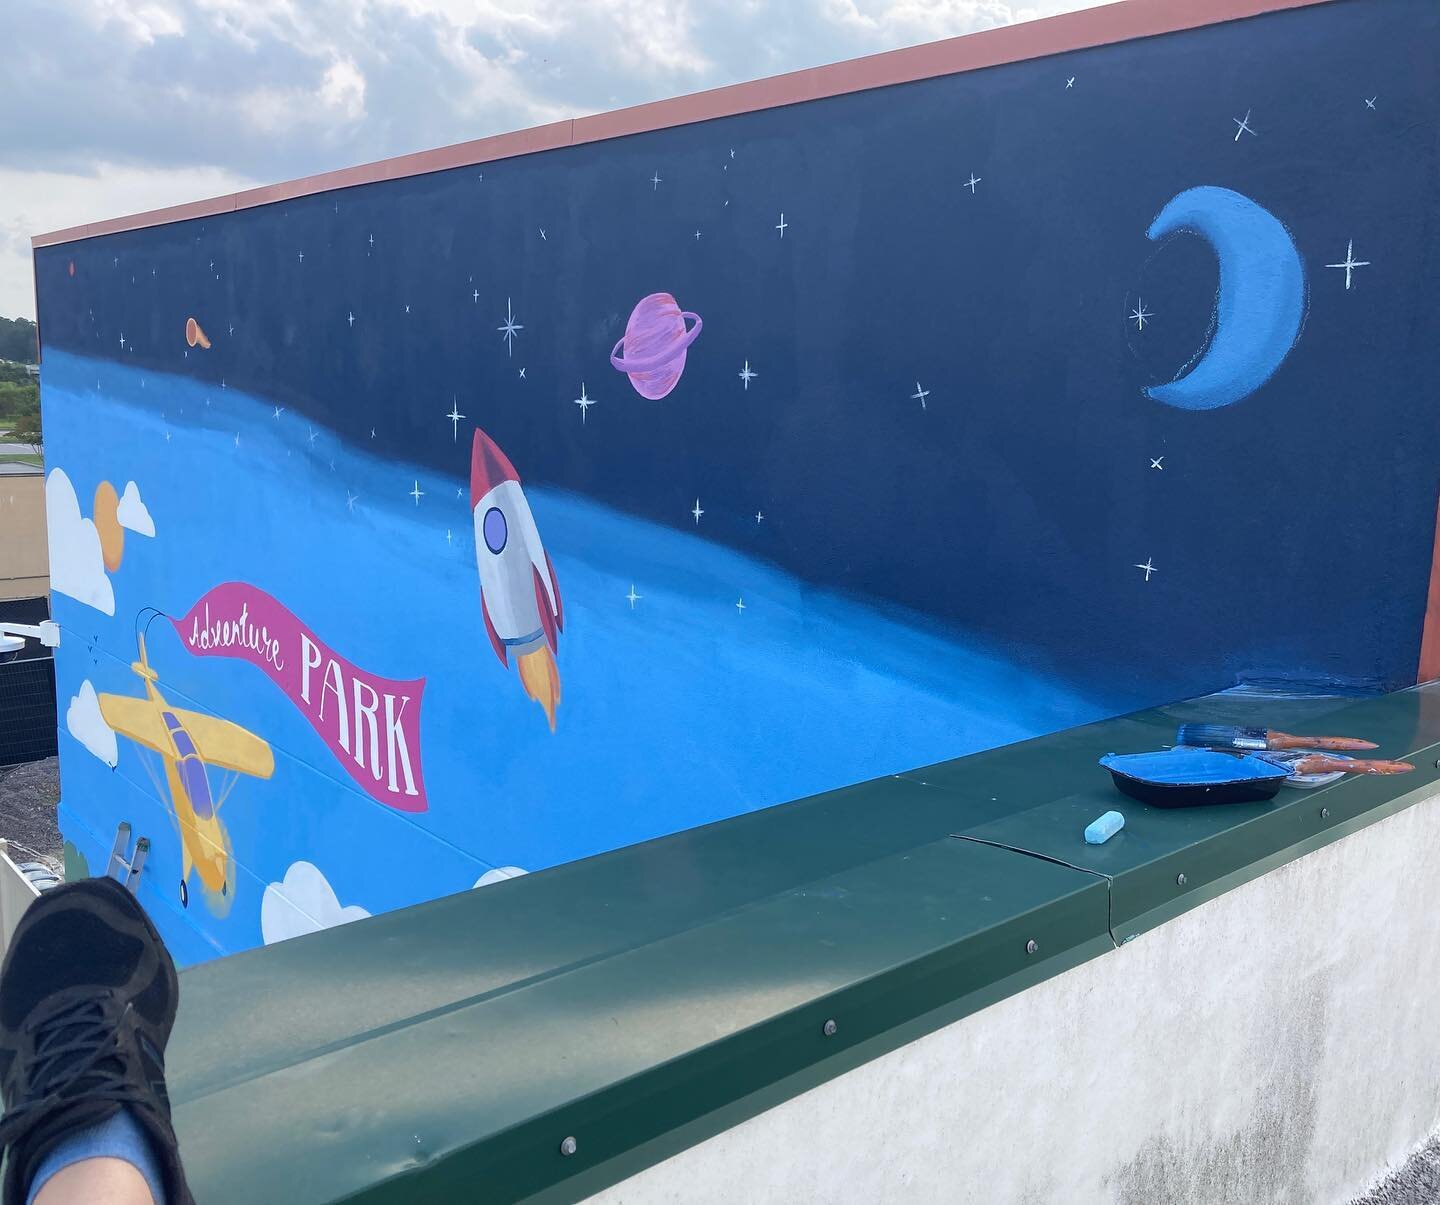 Ribbon cutting for this big ole mural today! Created by group member @tara_garrigan with help from @shayebebaby and @seefredette 
See it in its entirety at 10:30am today in Pooler for the official @ribbon cutting by @memorialhealthchildrens and @tang